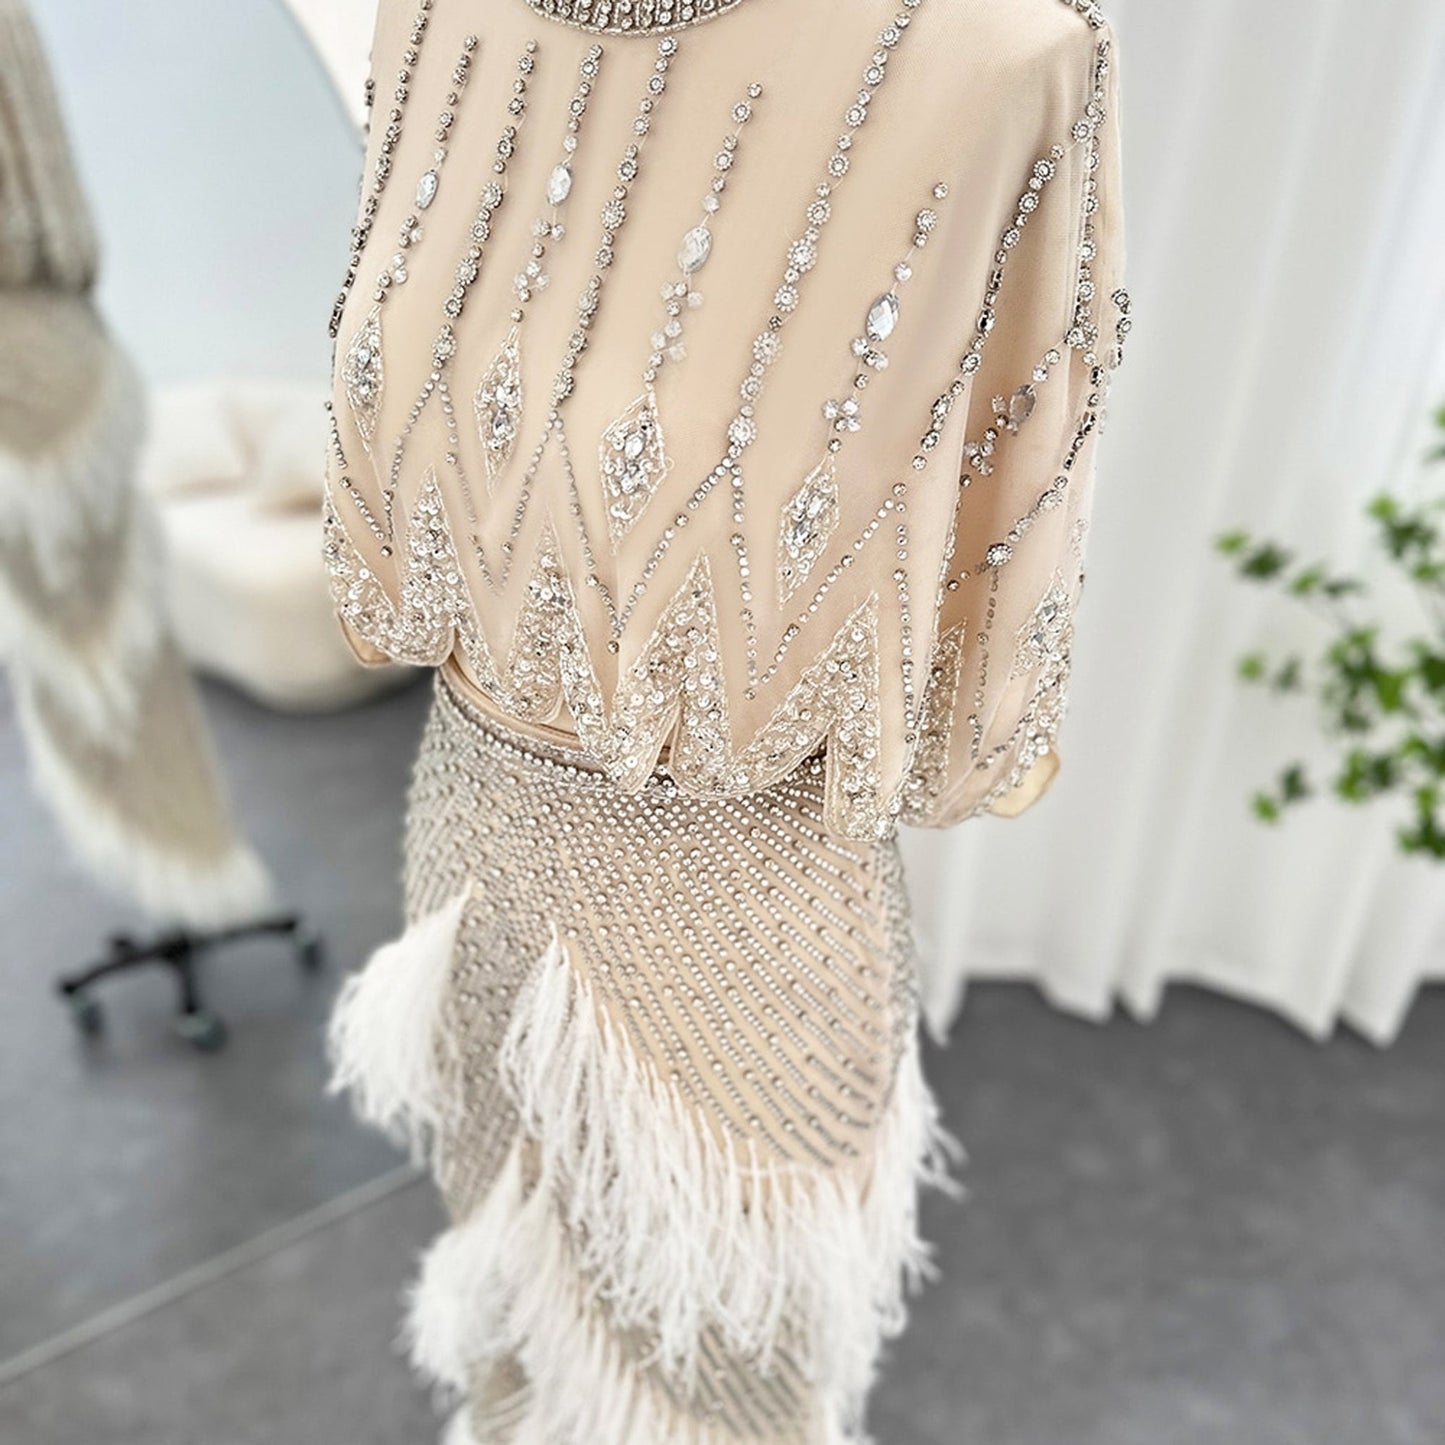 Beaded Rhinestone and Feather Crop Top and Skirt Set